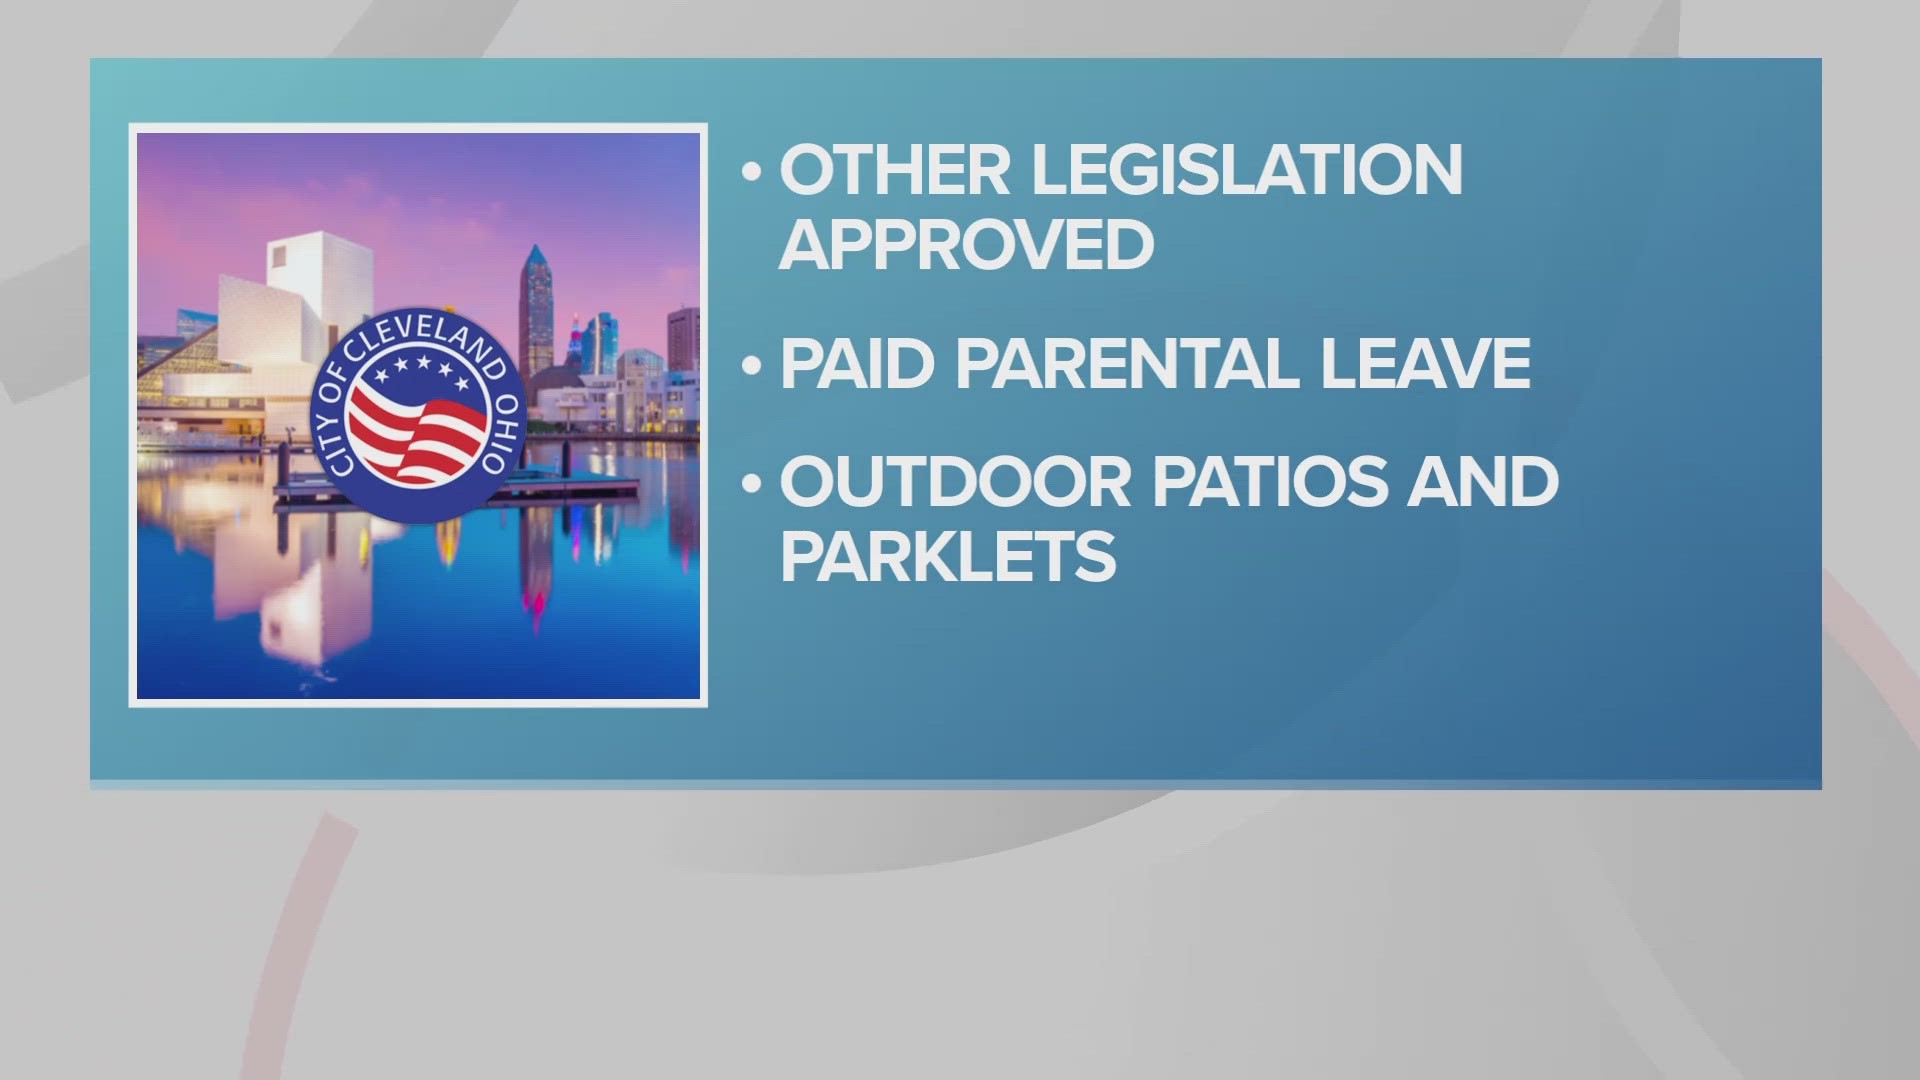 The new legislation will pay up to 500 hours leave (up to 12 weeks) at 100% to eligible city employees 'who experience a new child life event.'